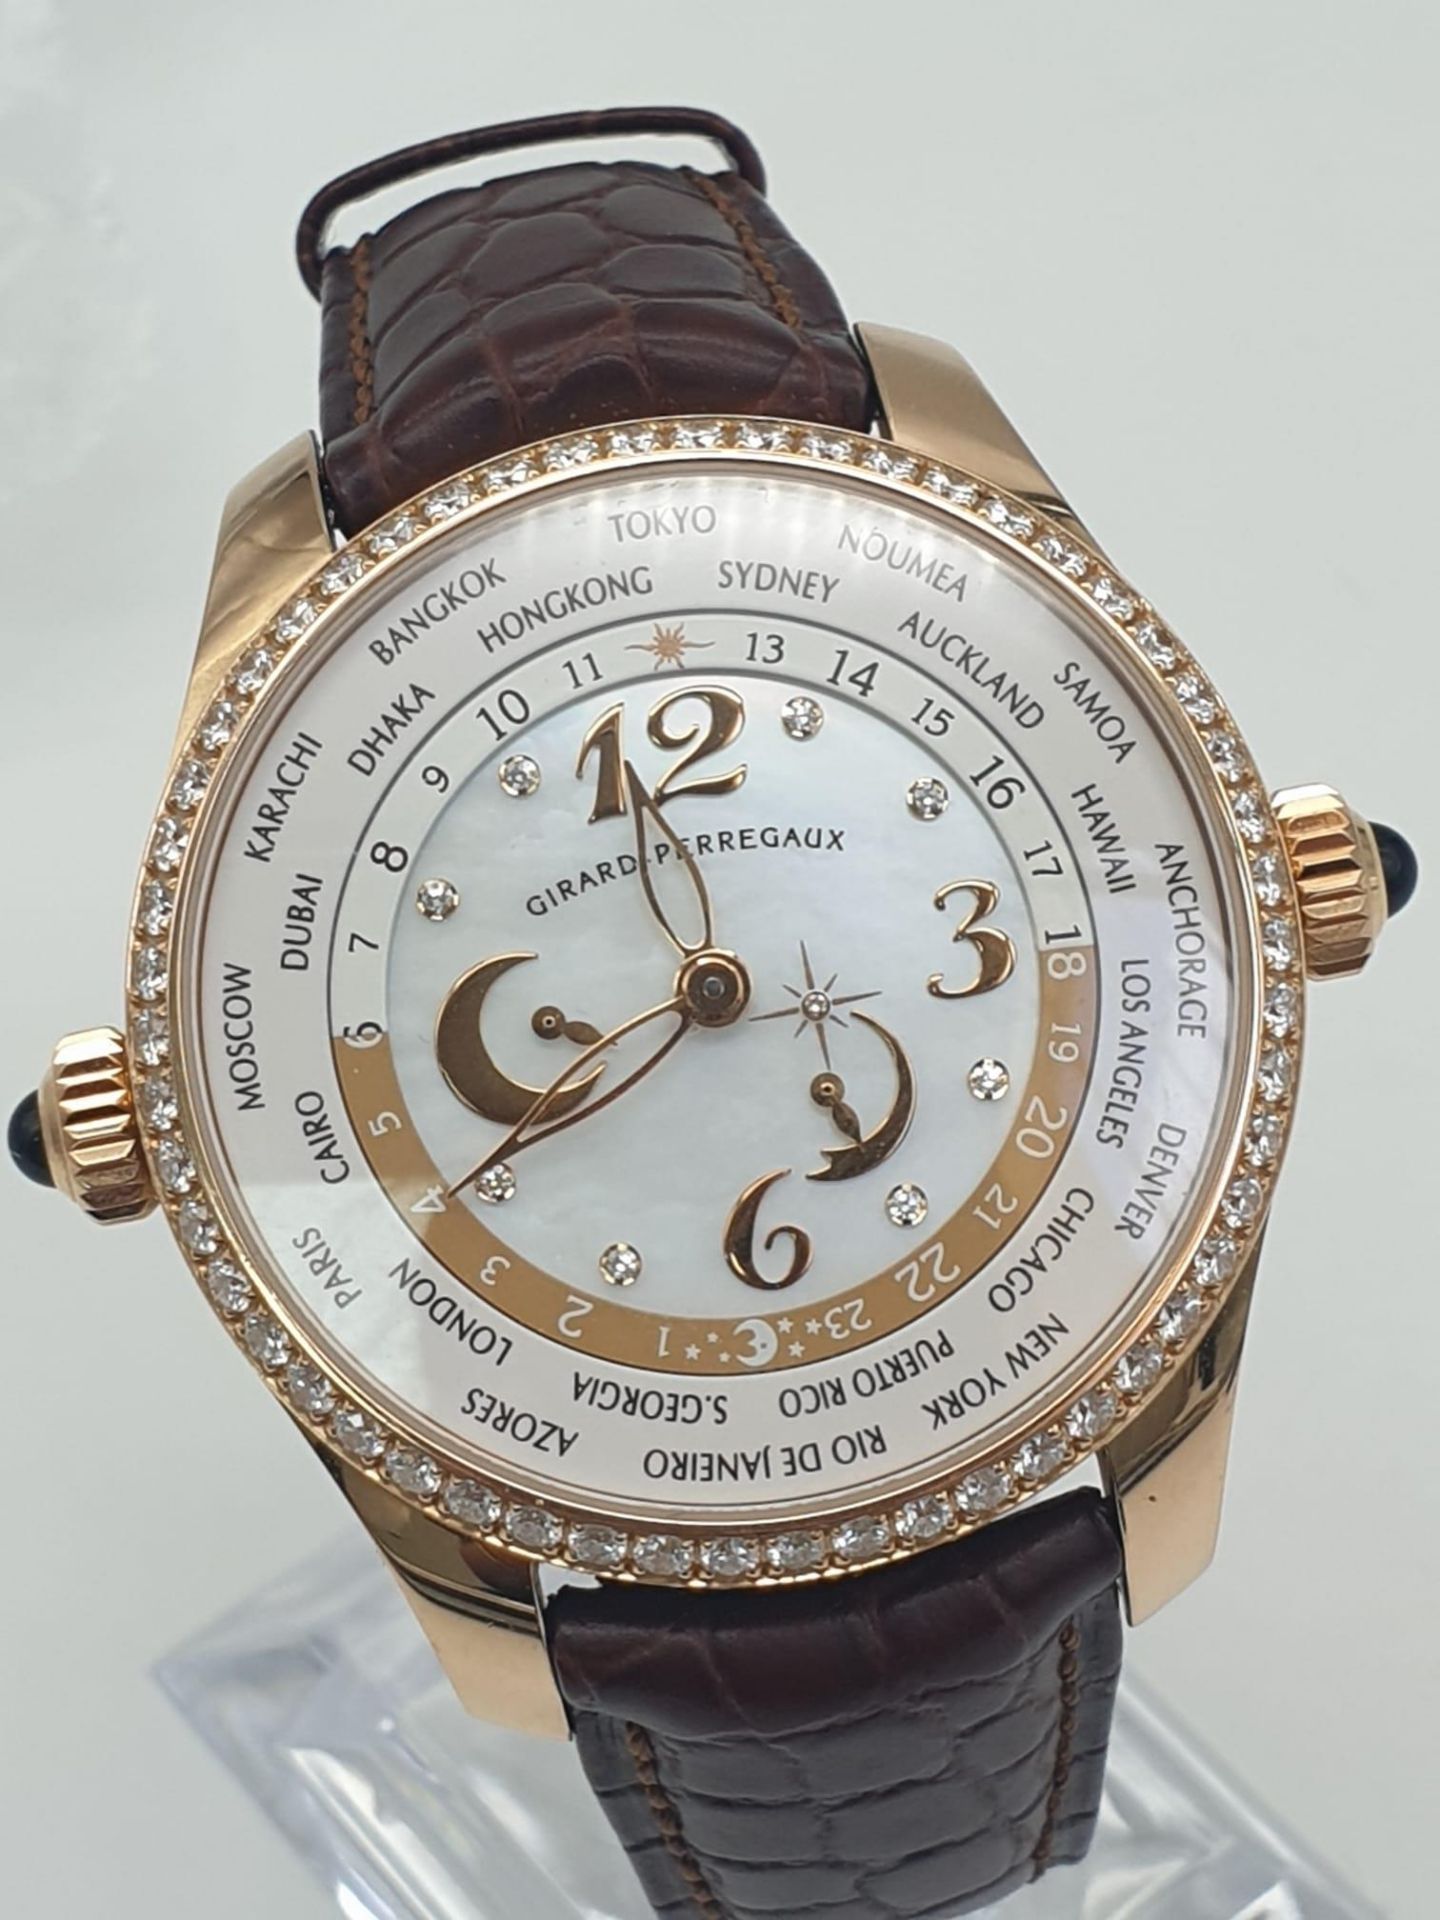 A Girard-Perregaux Financial World Time 18K Rose Gold Gents Watch. Brown leather strap with 18k rose